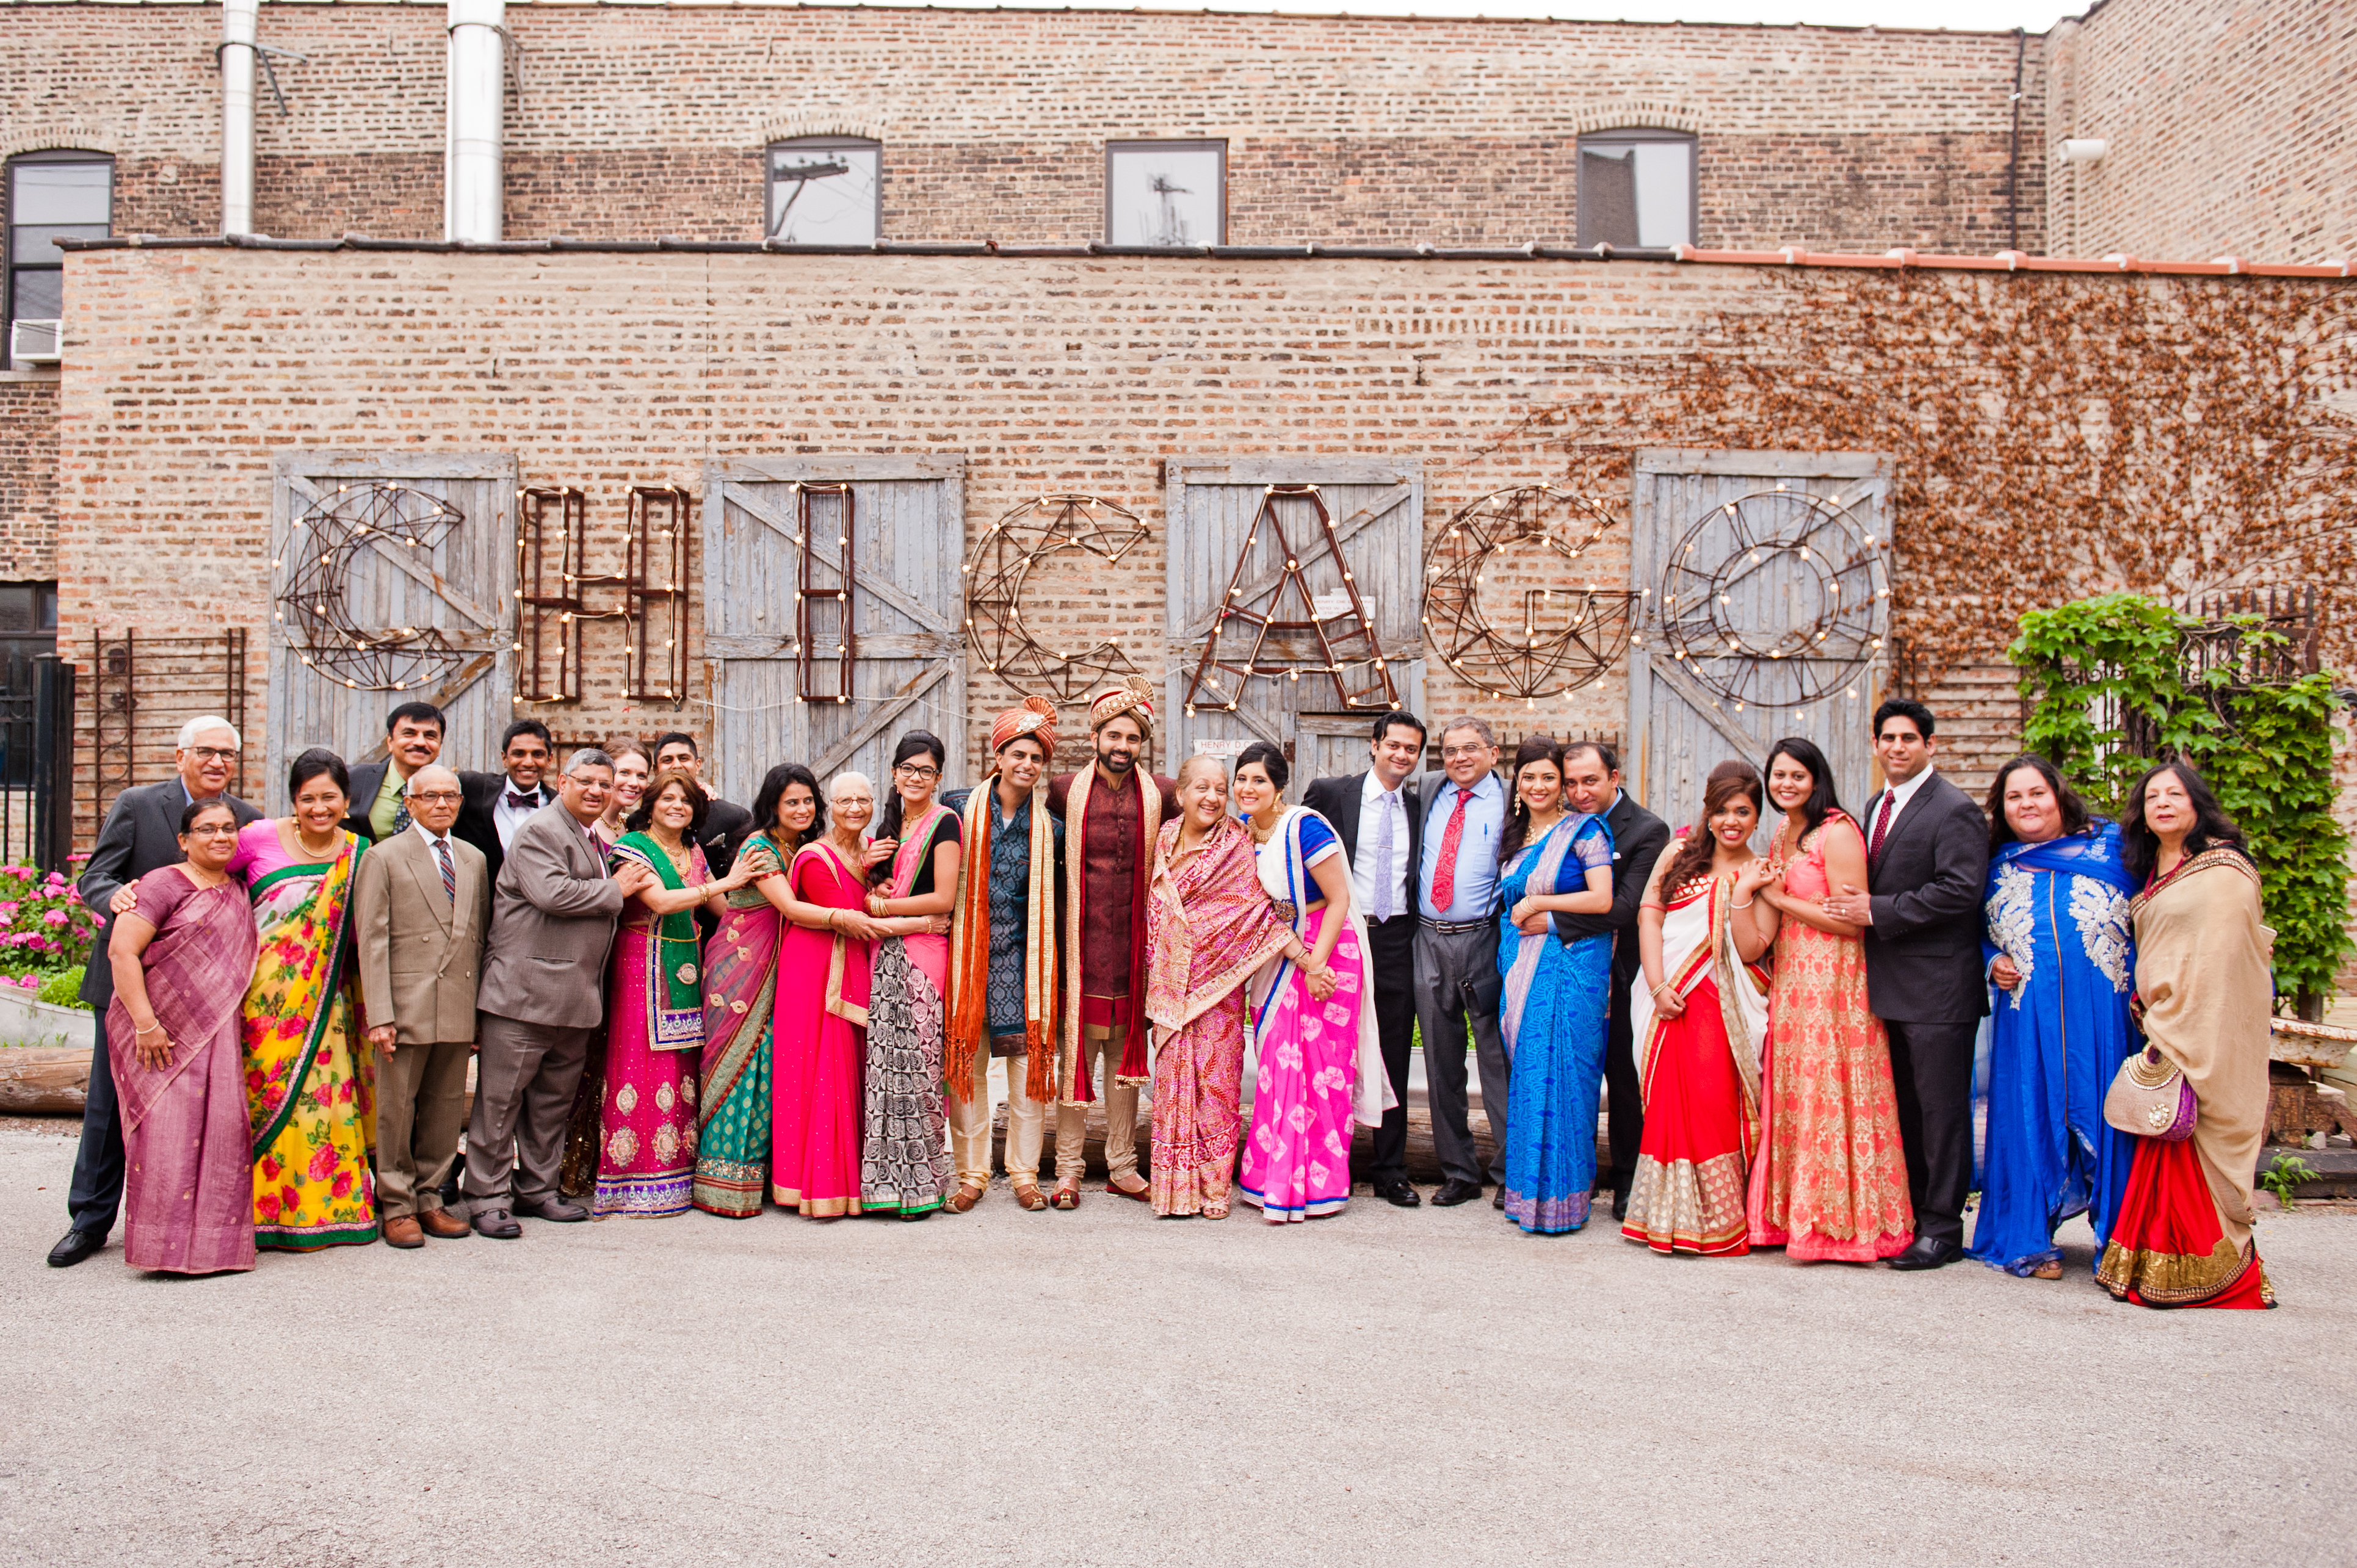 The Big Fat Indian Wedding! Friends and family celebrate.#Gaypride